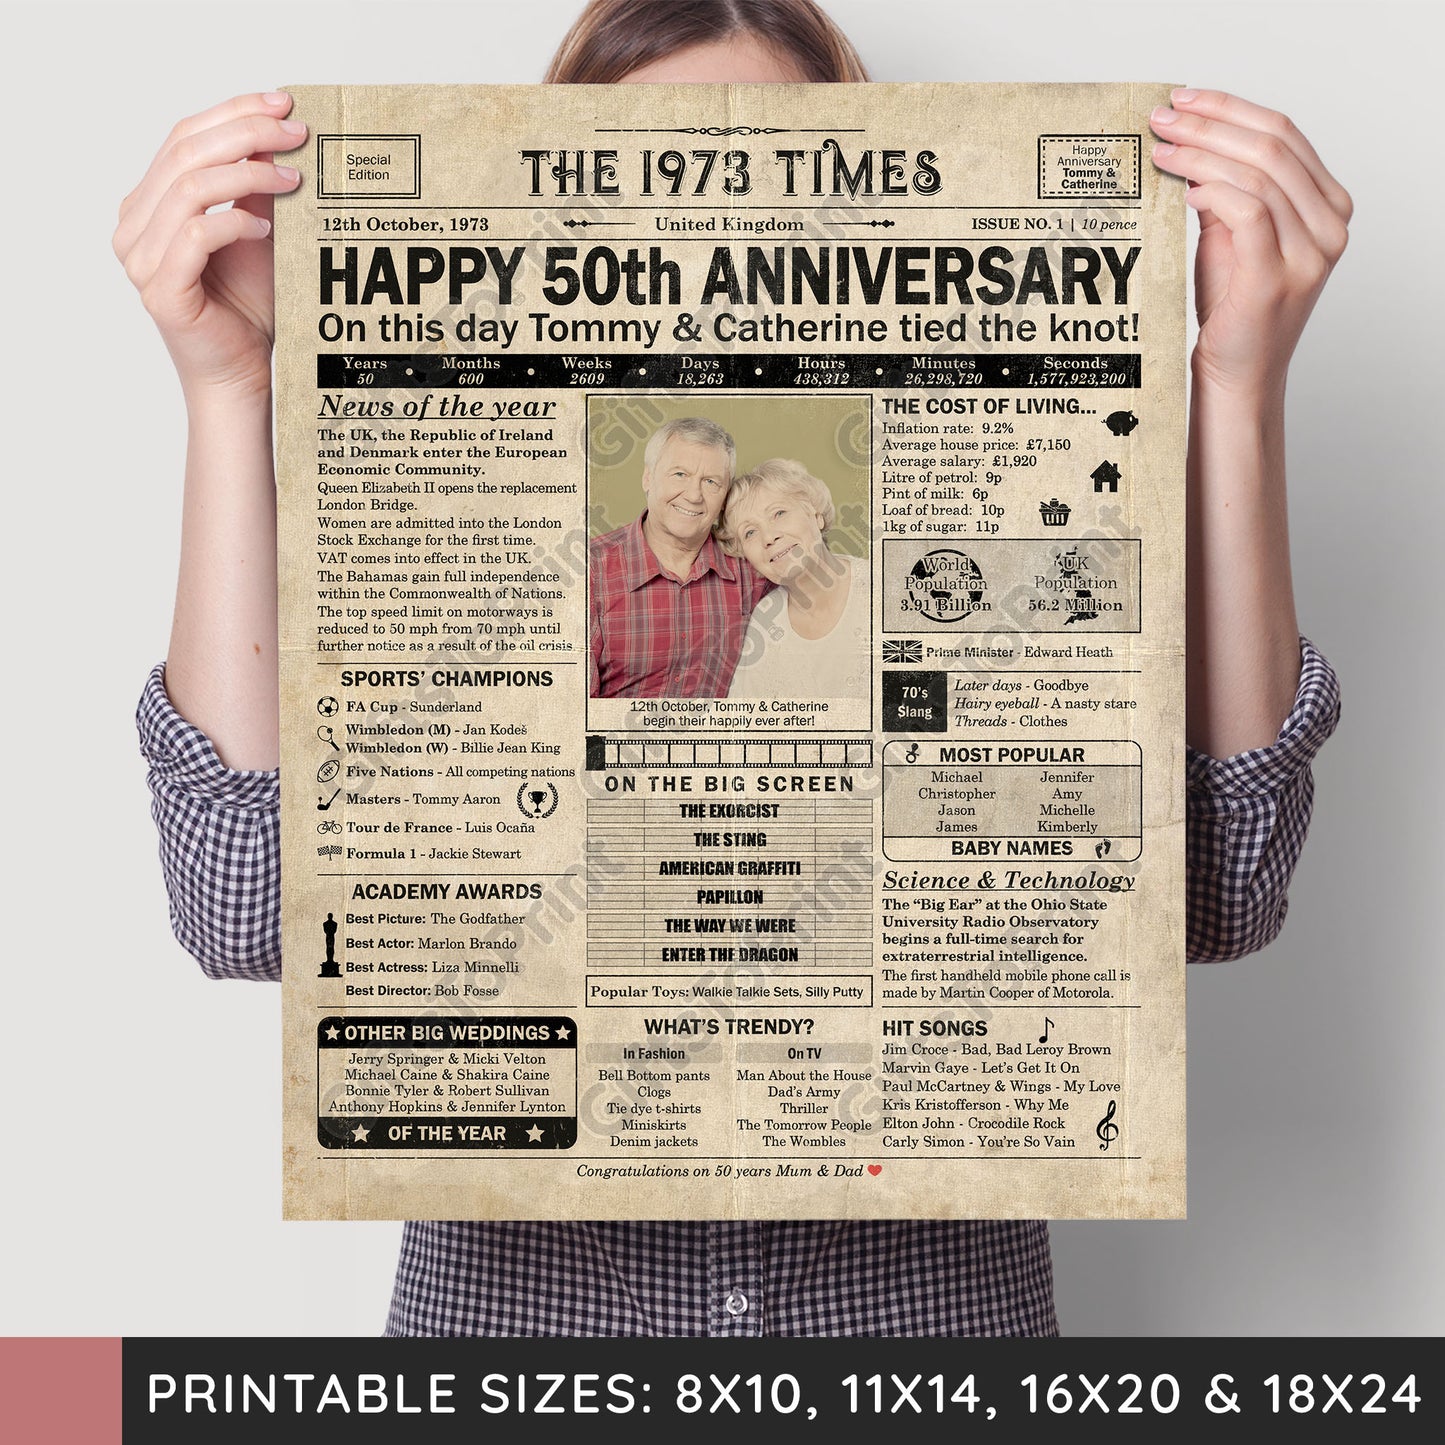 Personalised 50th Anniversary Gift: A Printable UK Newspaper Poster of 1973